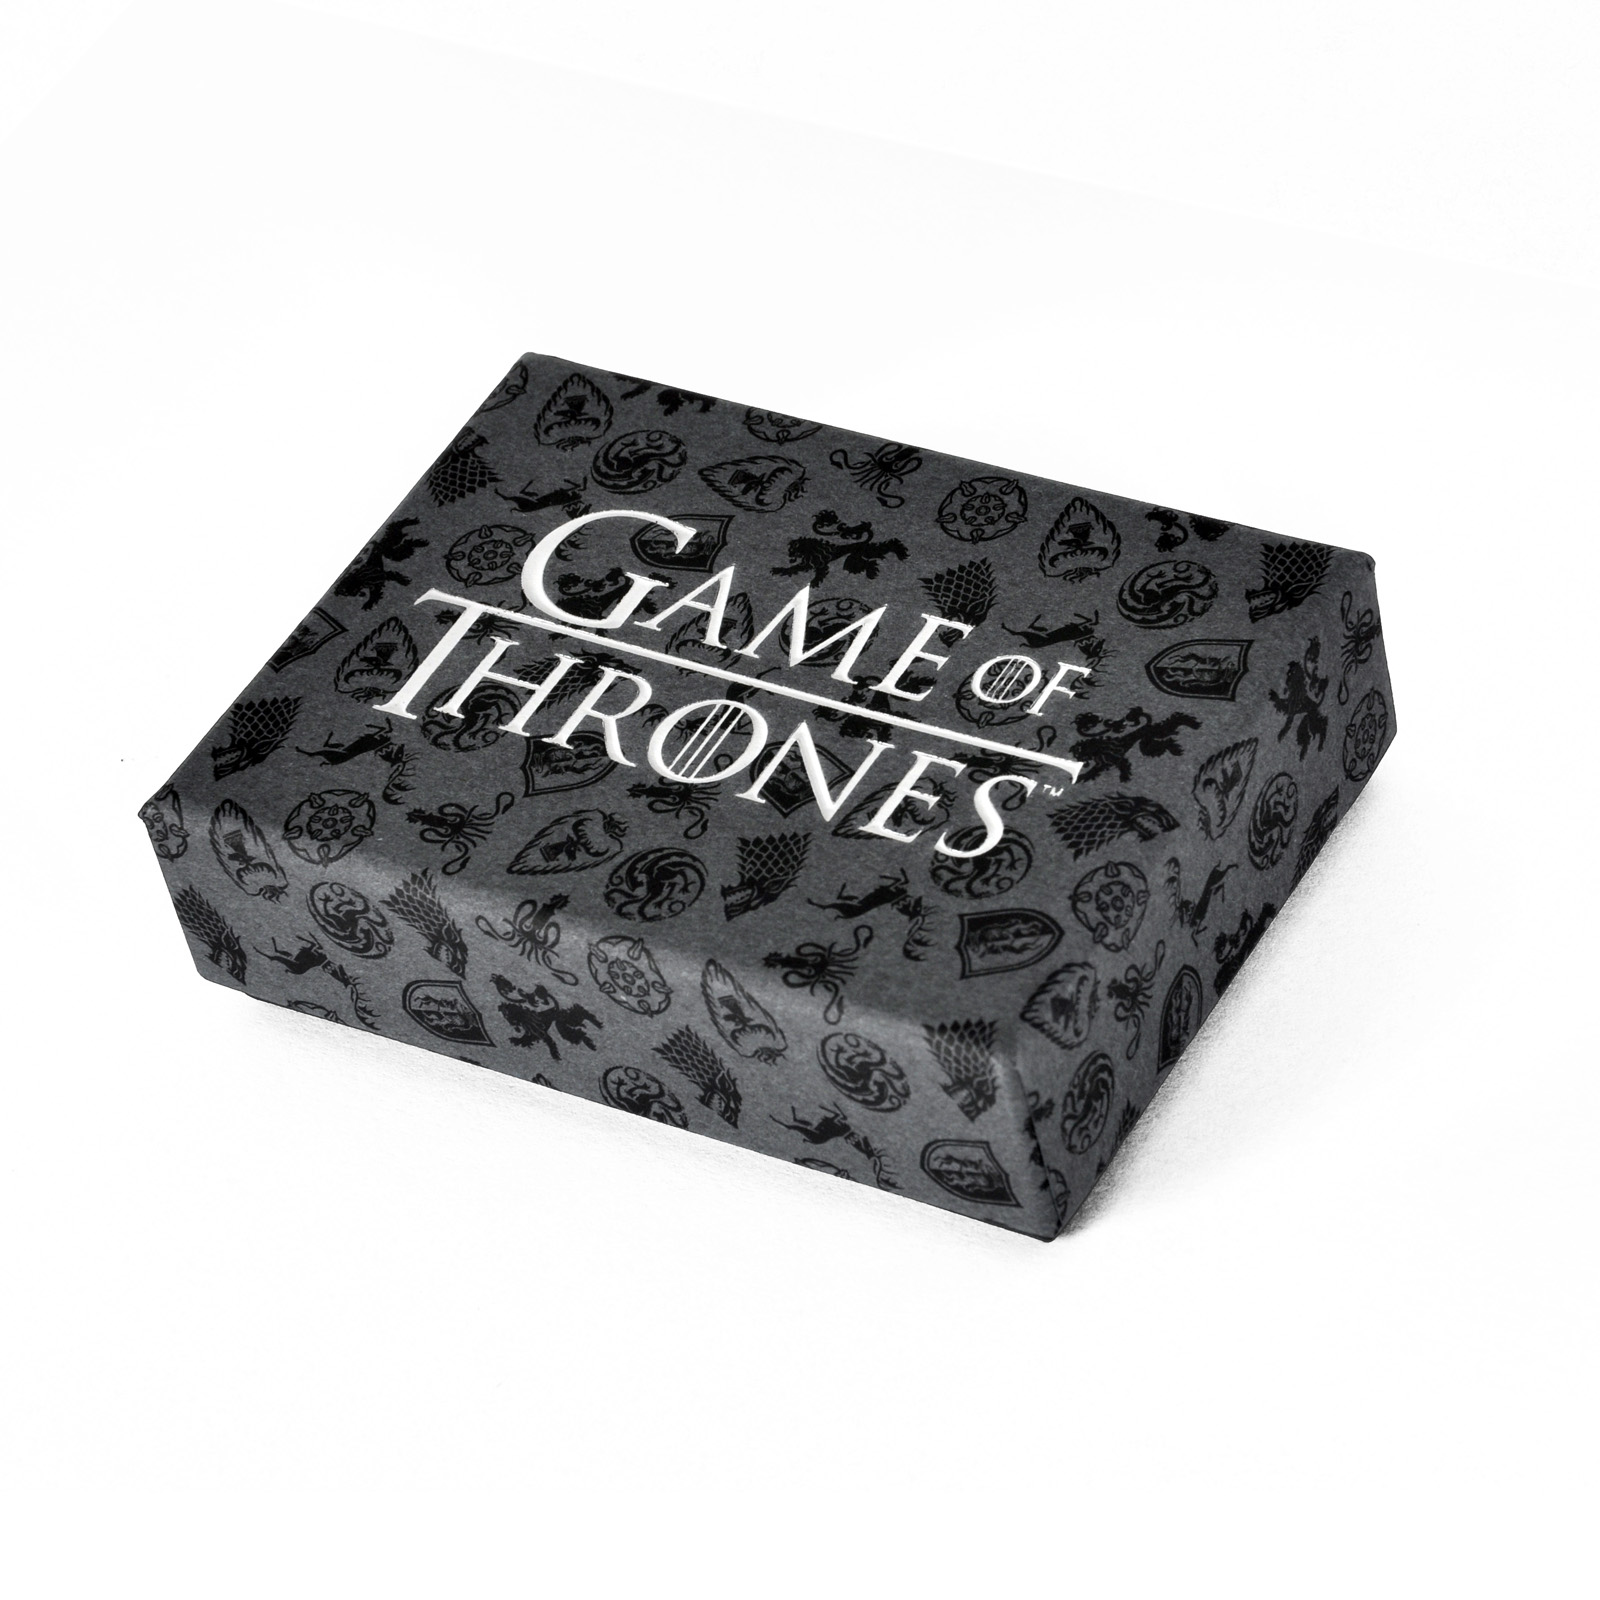 Game of Thrones - Cersei Lannister Chain